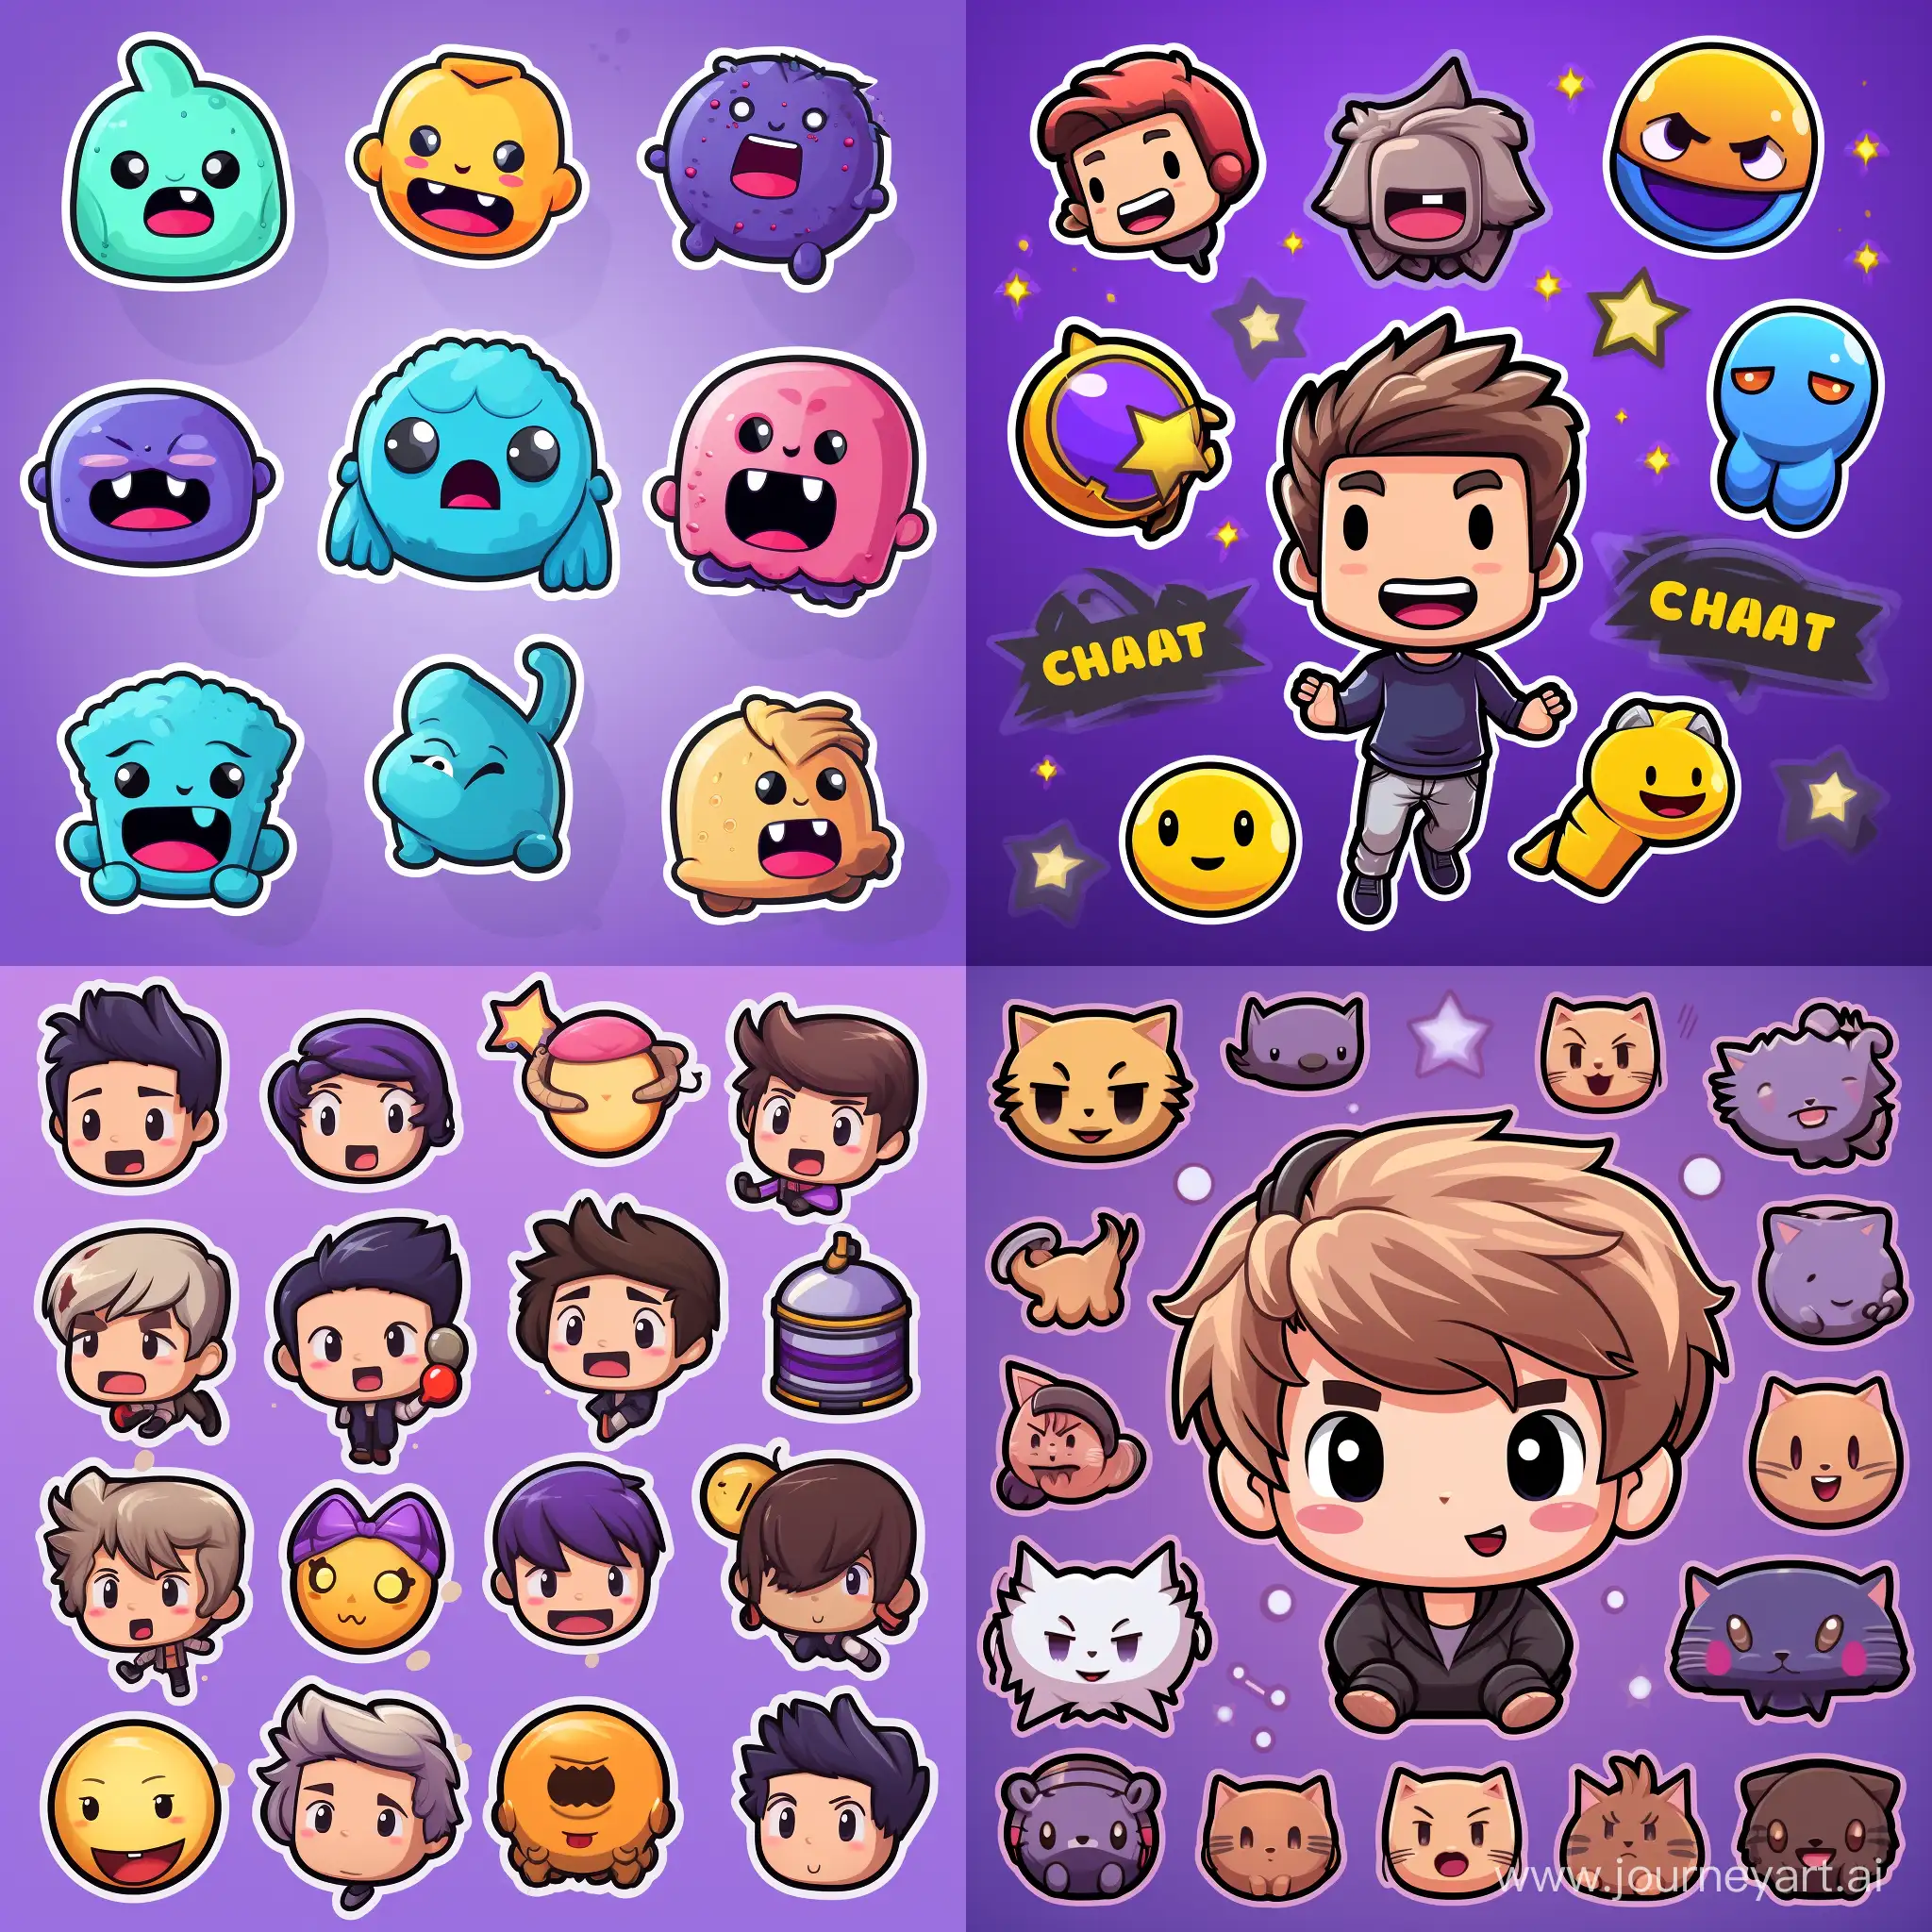 Adorable-Animated-Emotes-and-Sub-Badges-for-Twitch-Discord-and-Kik